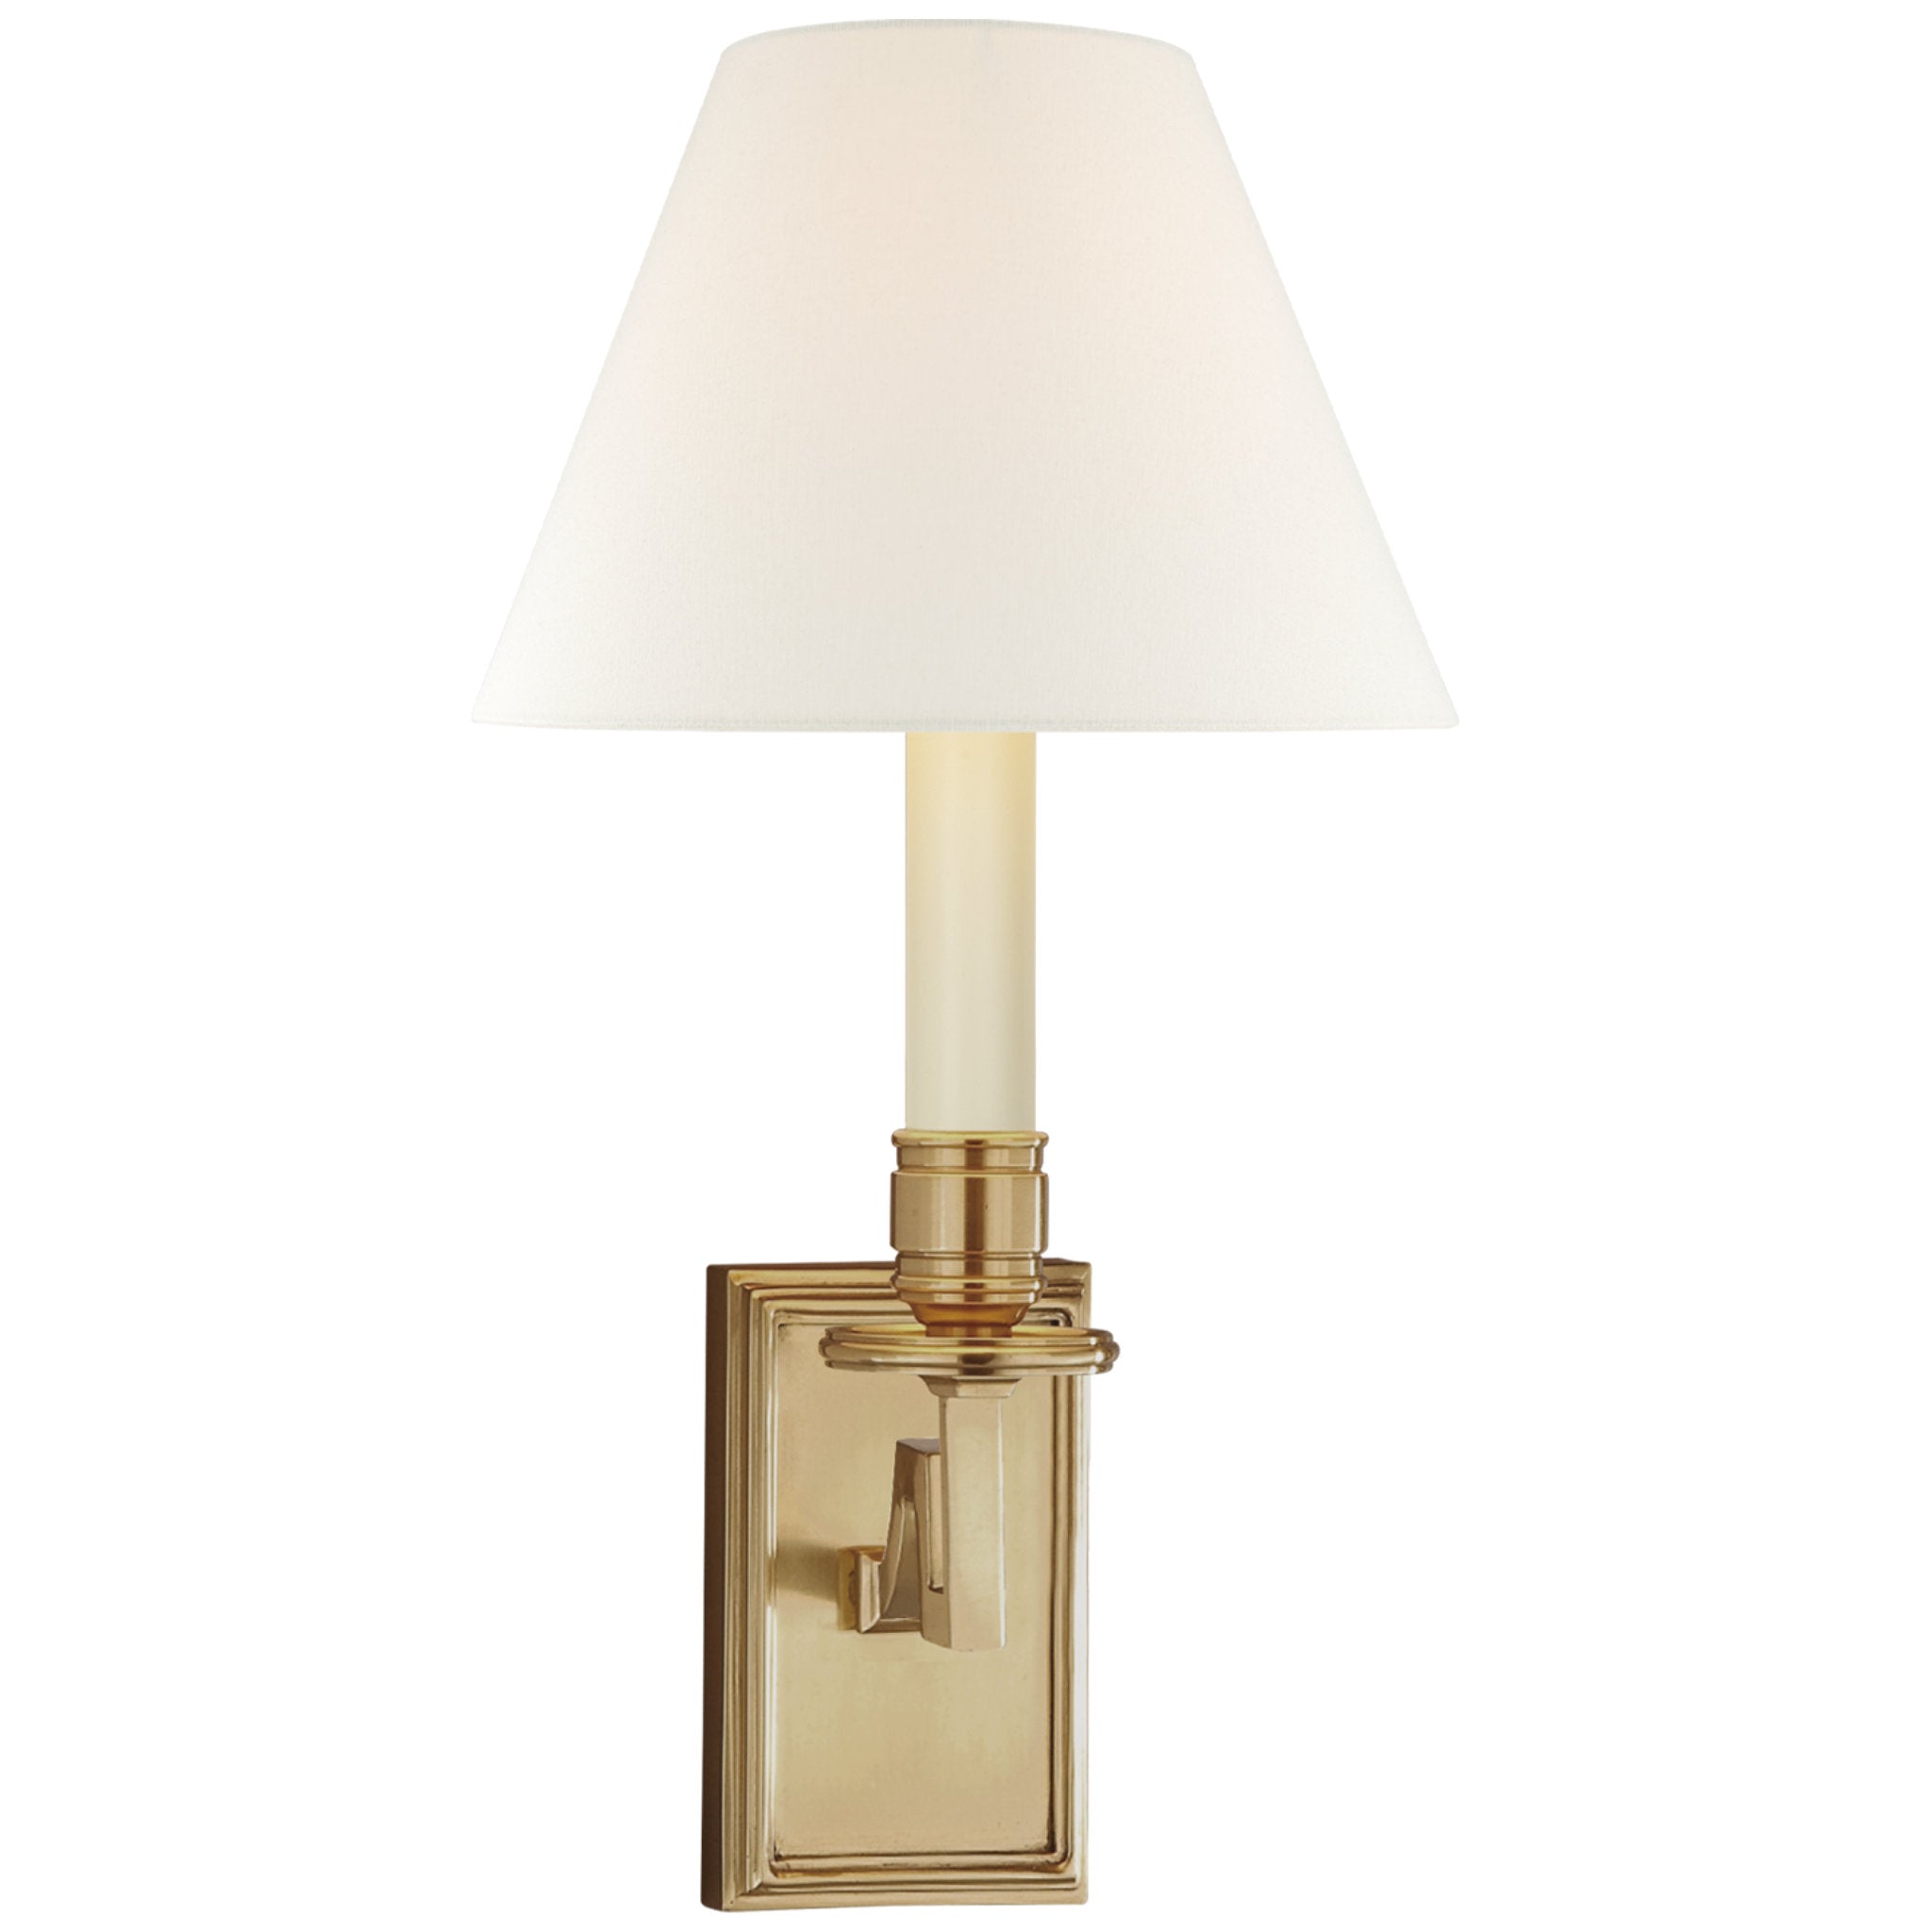 Alexa Hampton Dean Library Sconce in Natural Brass with Linen Shade